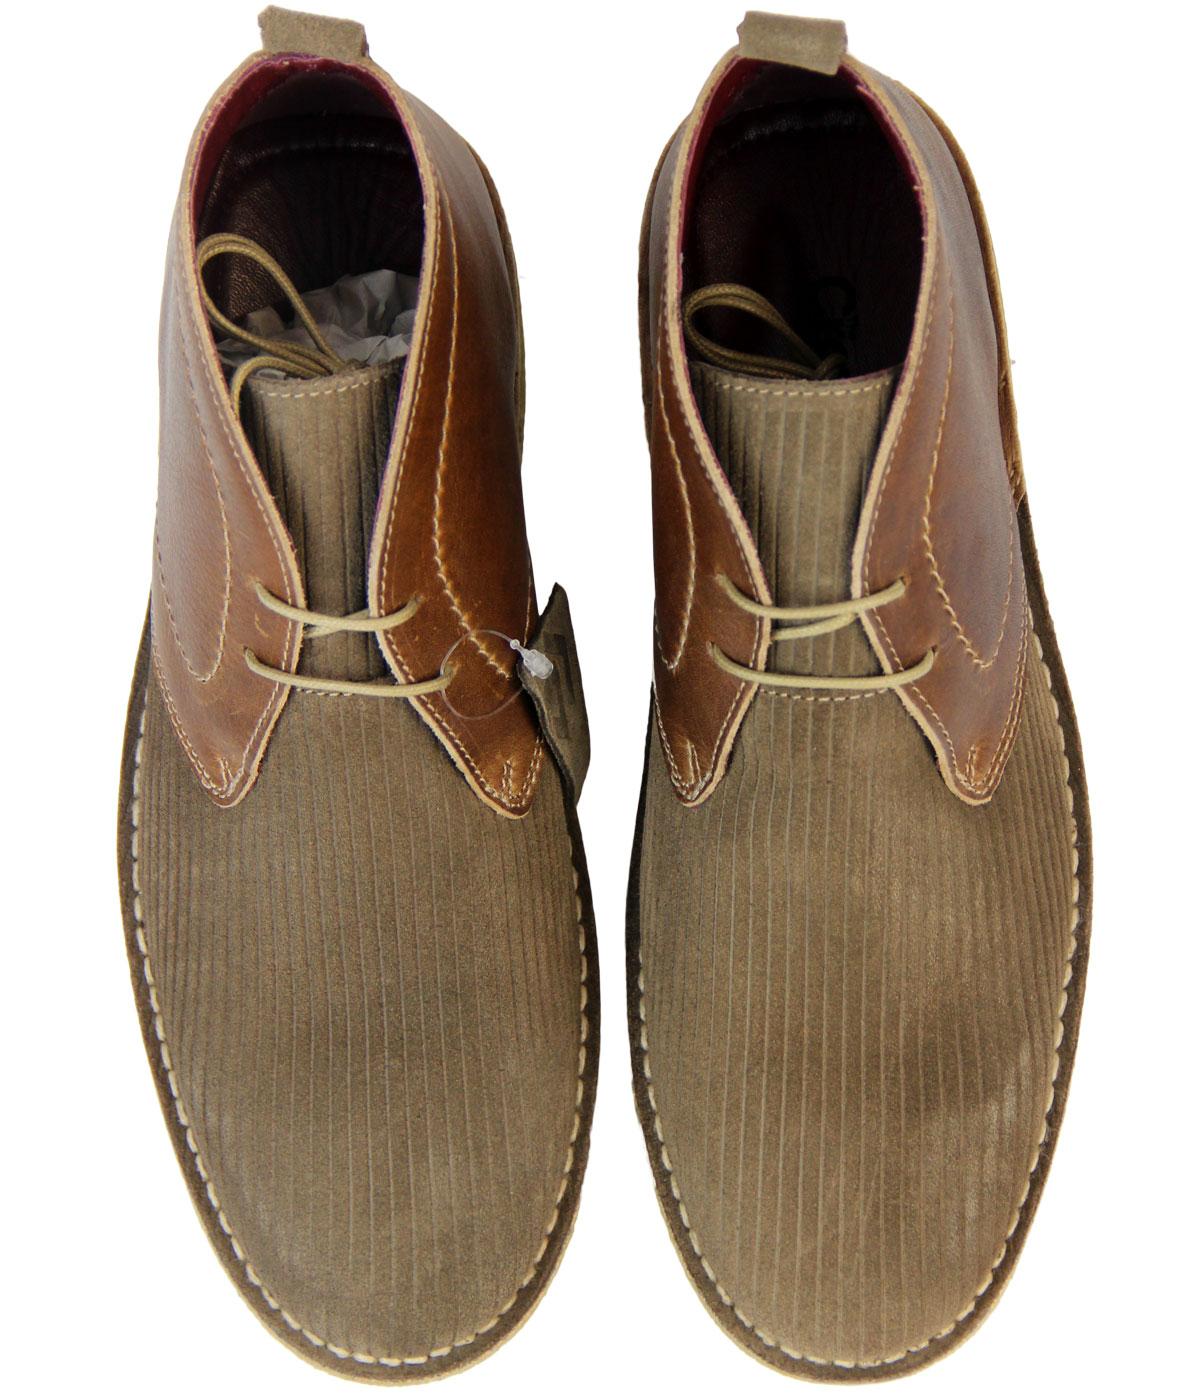 DELICIOUS JUNCTION Crowley Mod Cord Suede & Leather Desert Boots